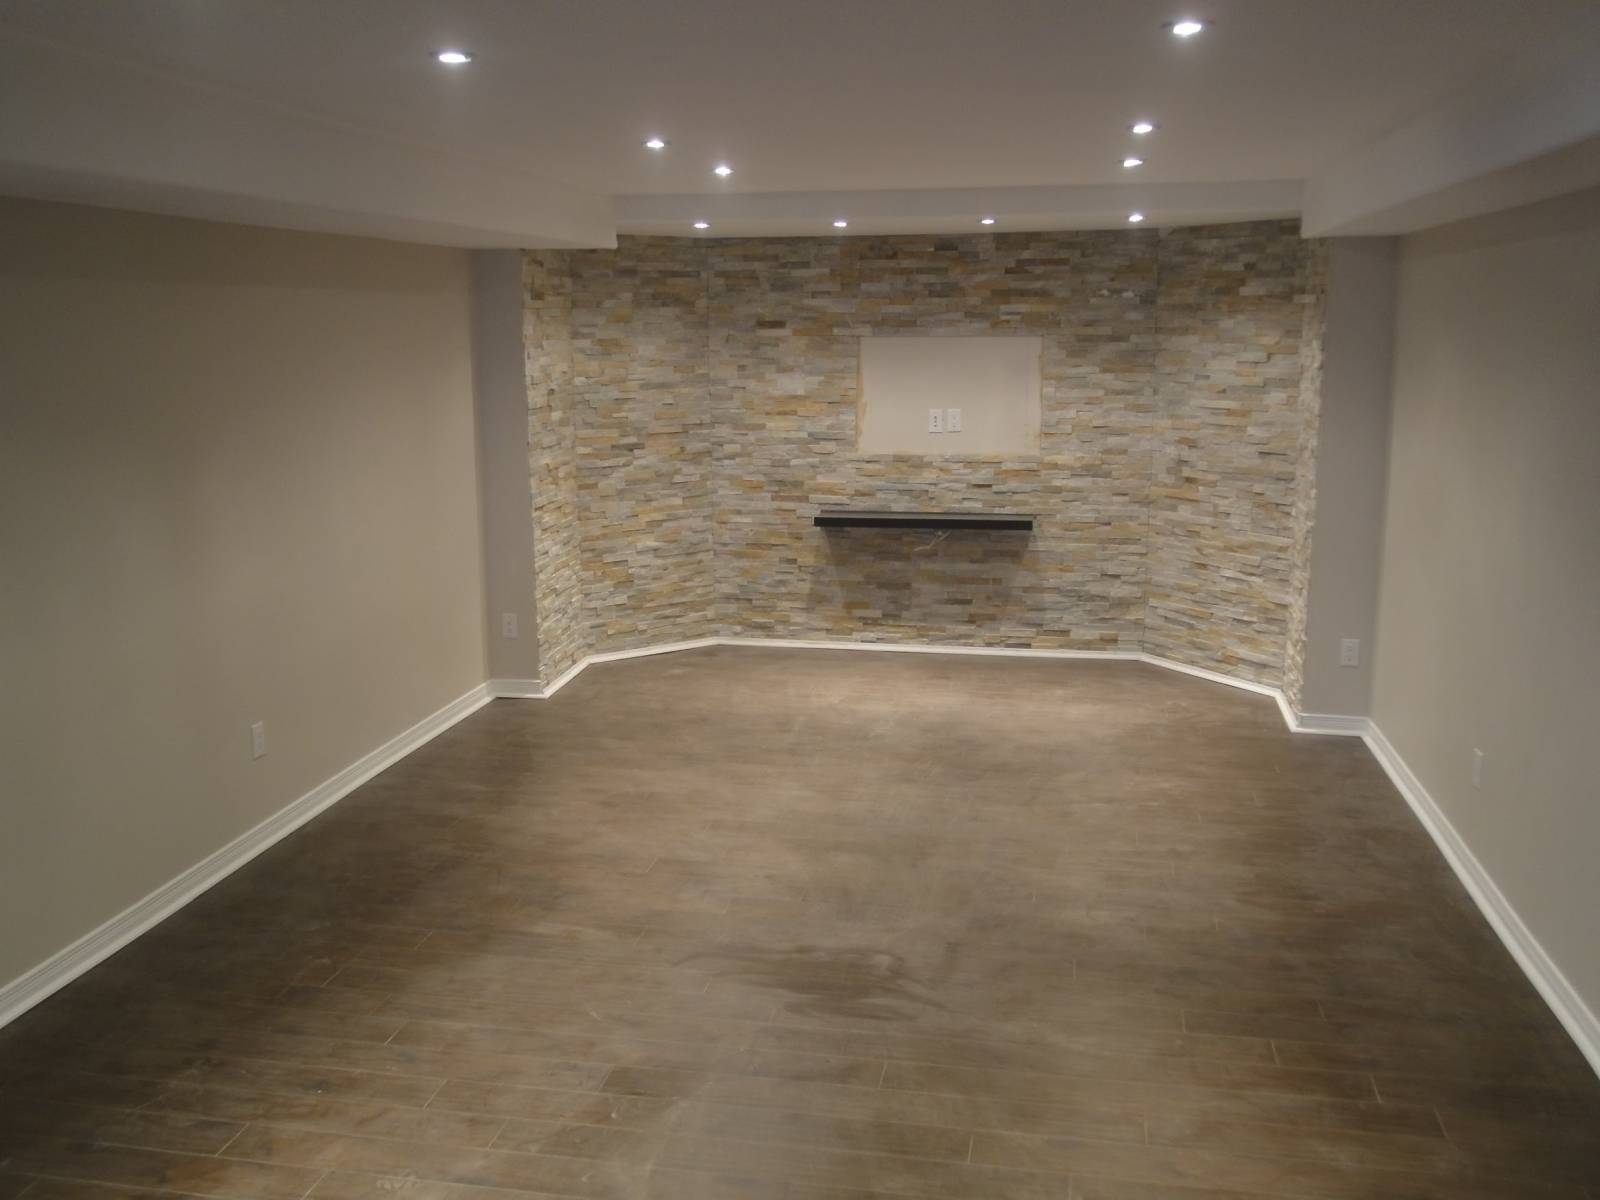 11 Reasons to Finish Your Unfinished Basement